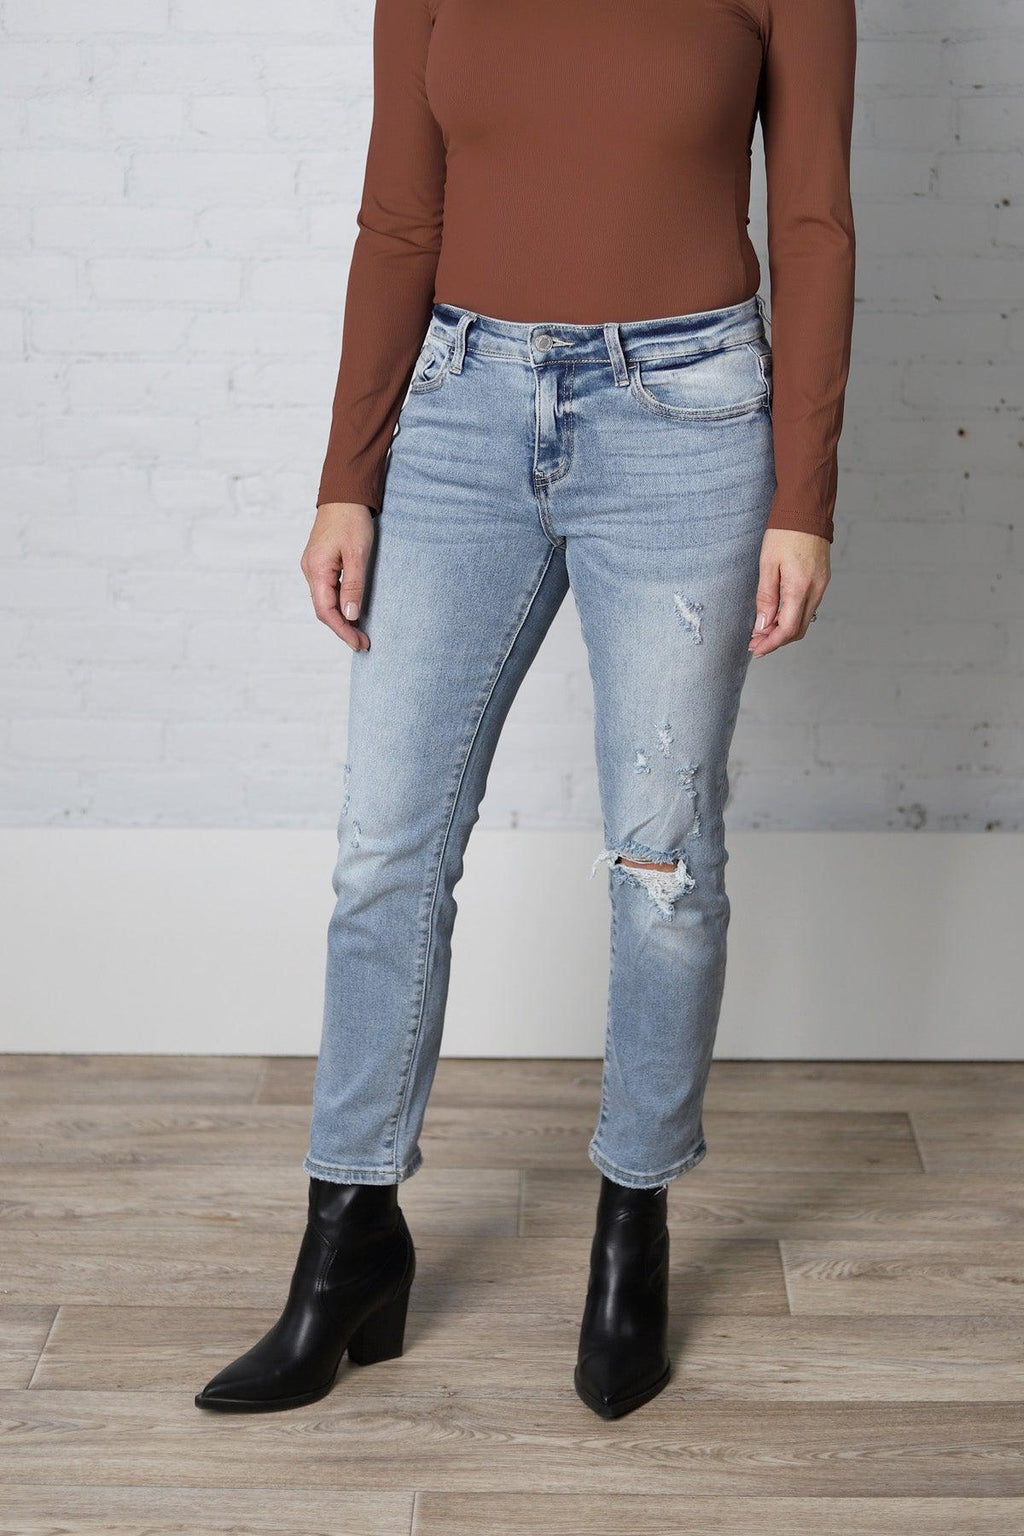 – Gallery 512 Jeans Boutique